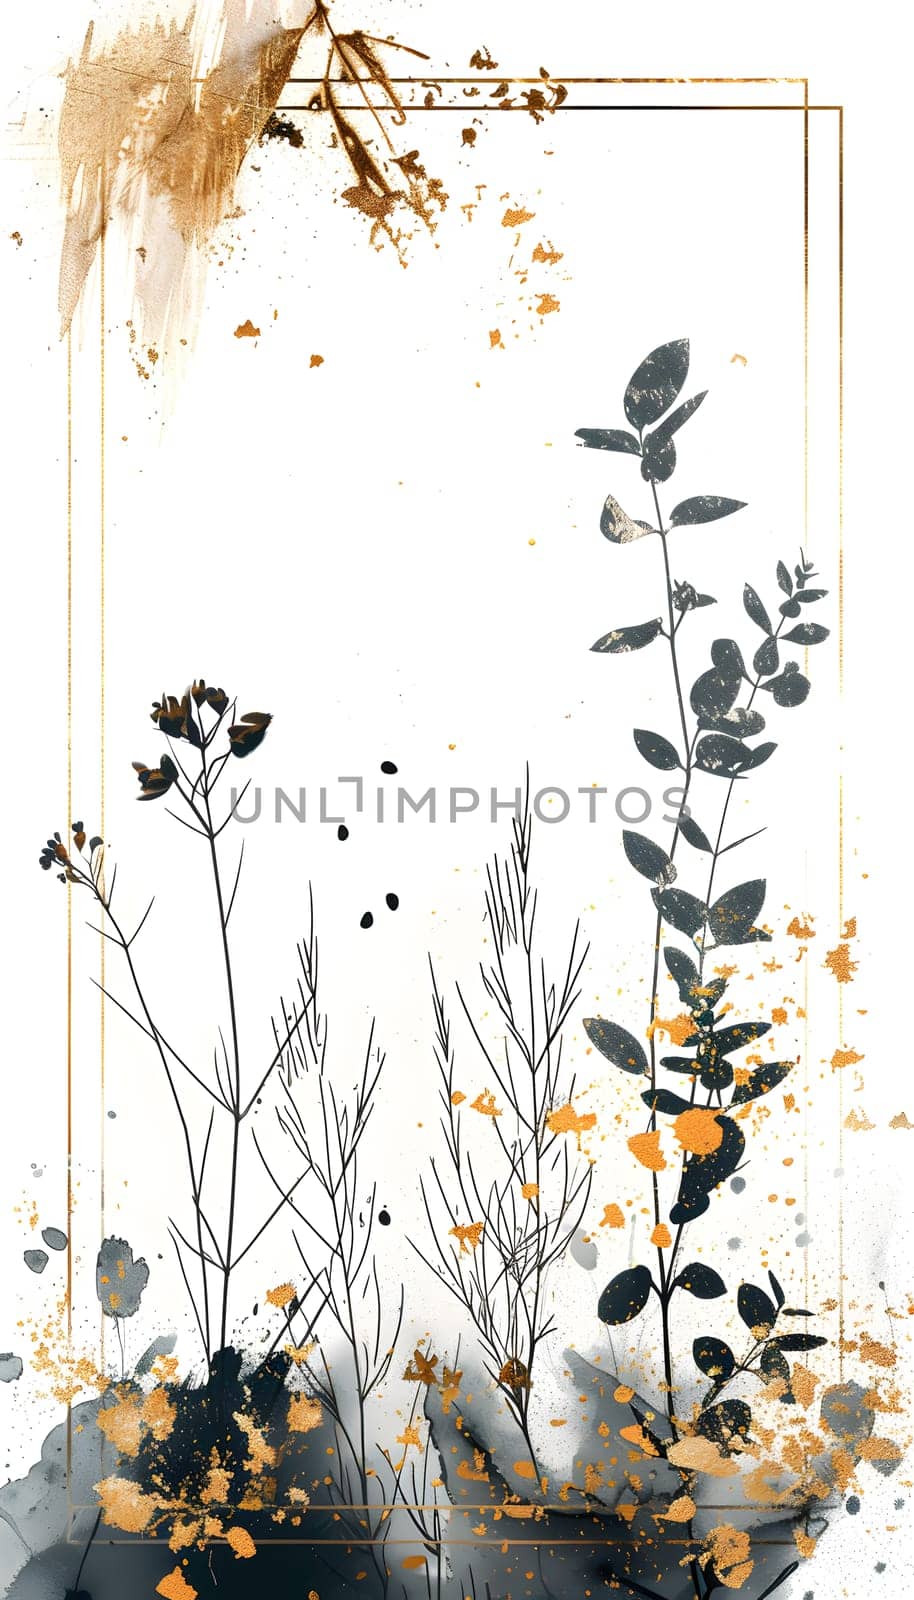 An art piece showcasing a beautiful arrangement of flowers and leaves on a branch, framed in gold against a white background, a stunning visual composition